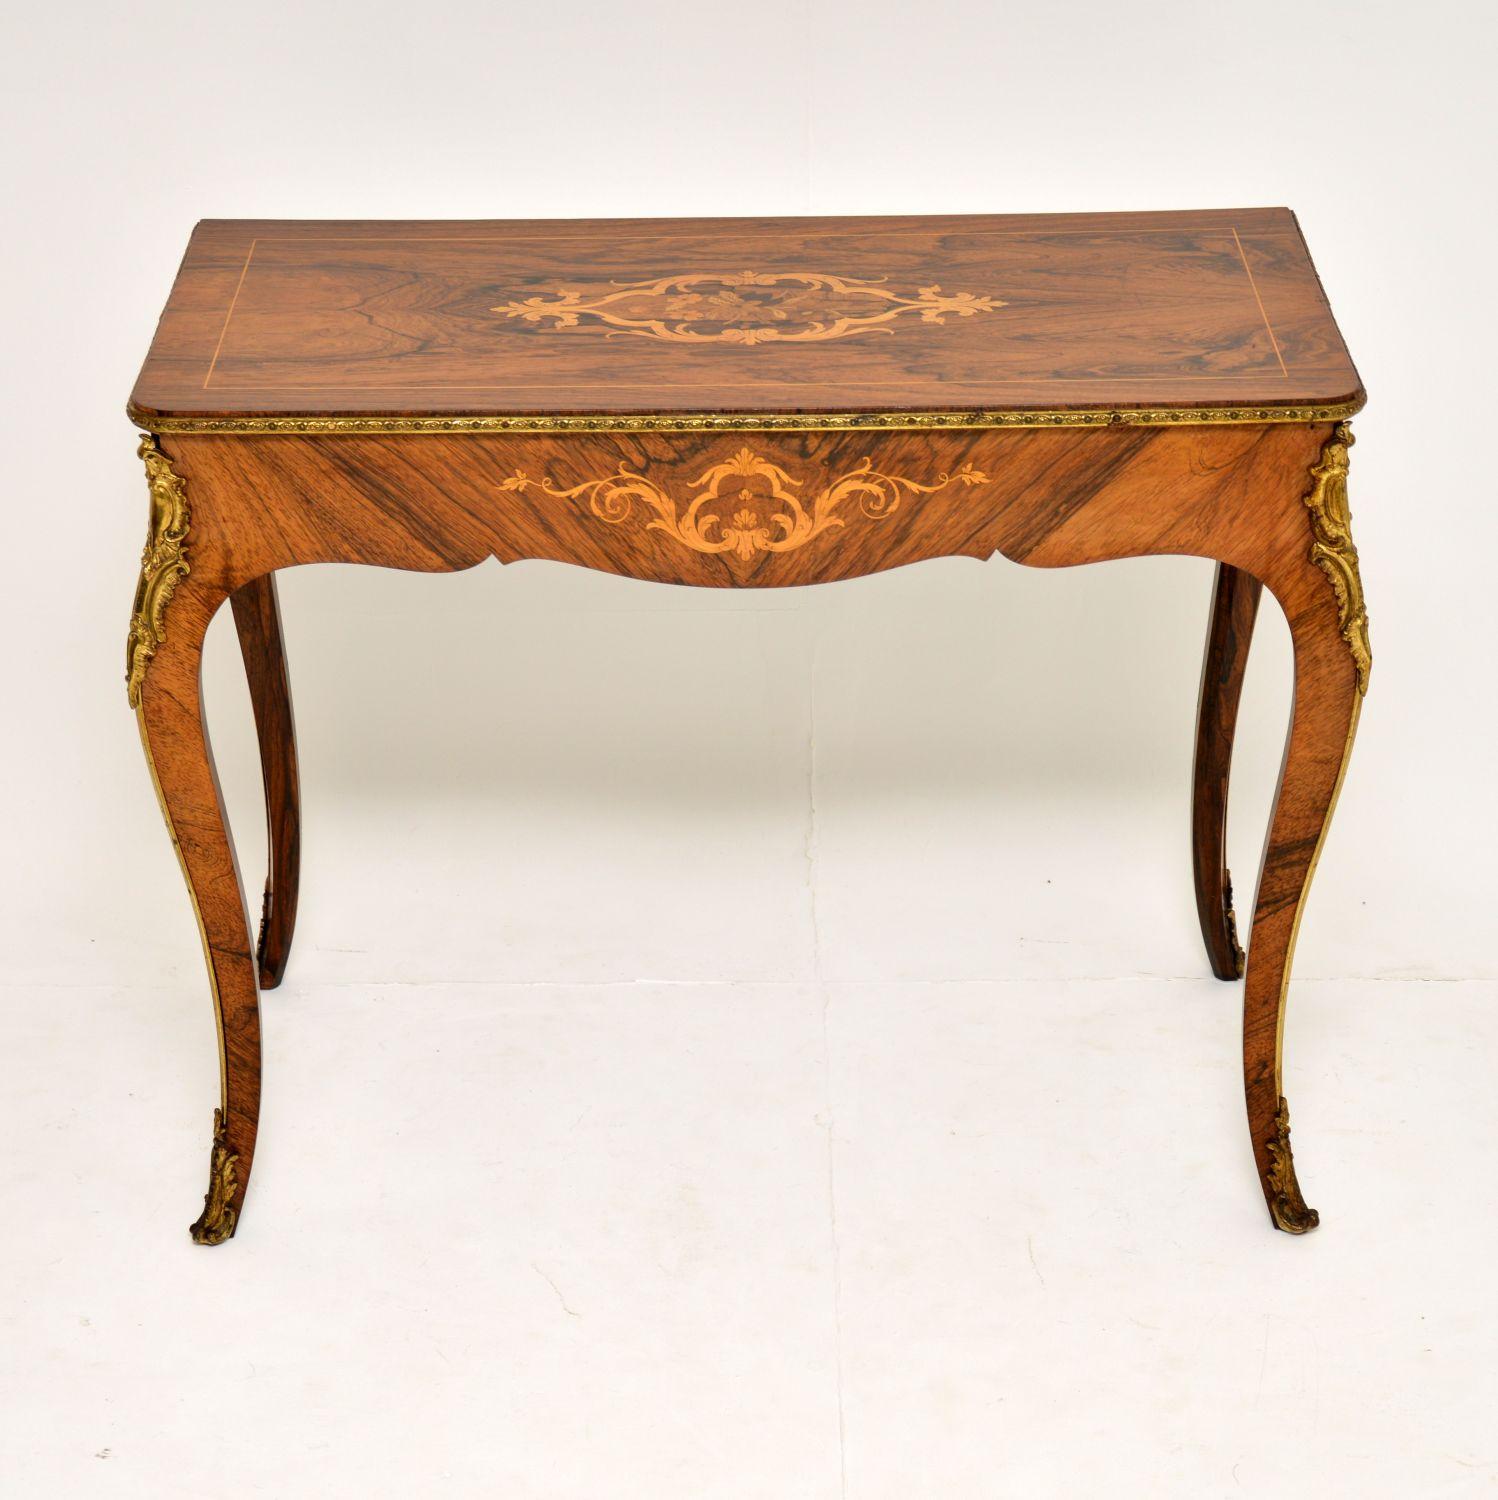 Fine quality antique Victorian console side table dating from circa 1860s period, in very good condition, with loads of character and a lovely original color.

It has some exquisite marquetry of many different exotic woods. The marquetry